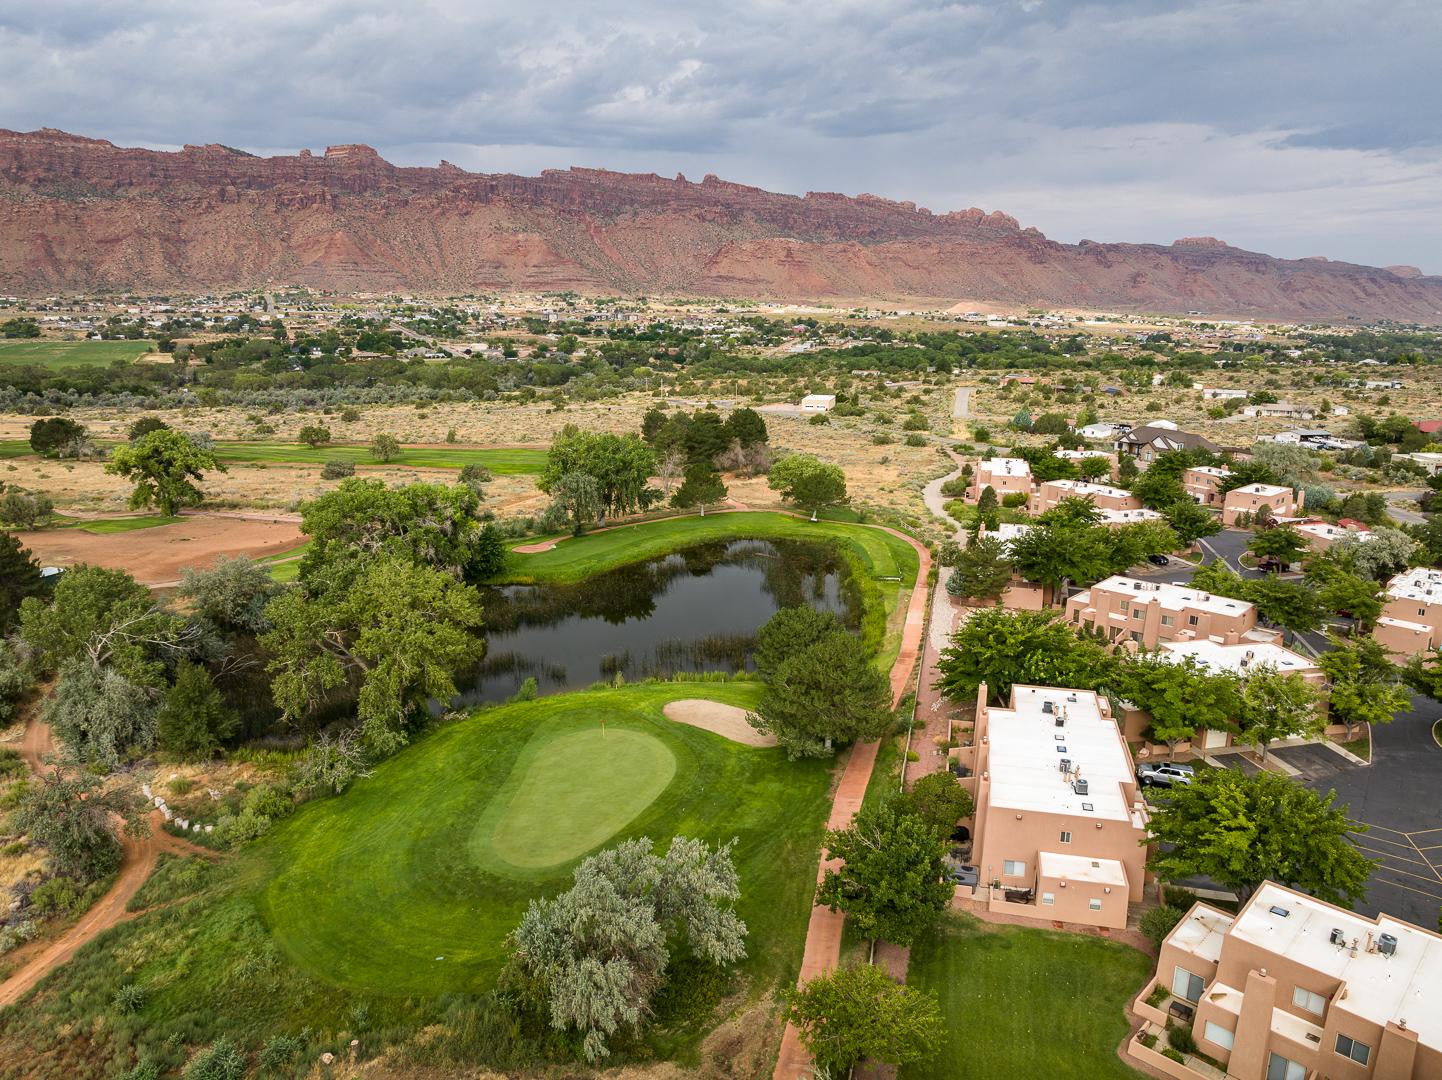 Amazing location right on the Moab Golf Course with great views on the Moab Rim!